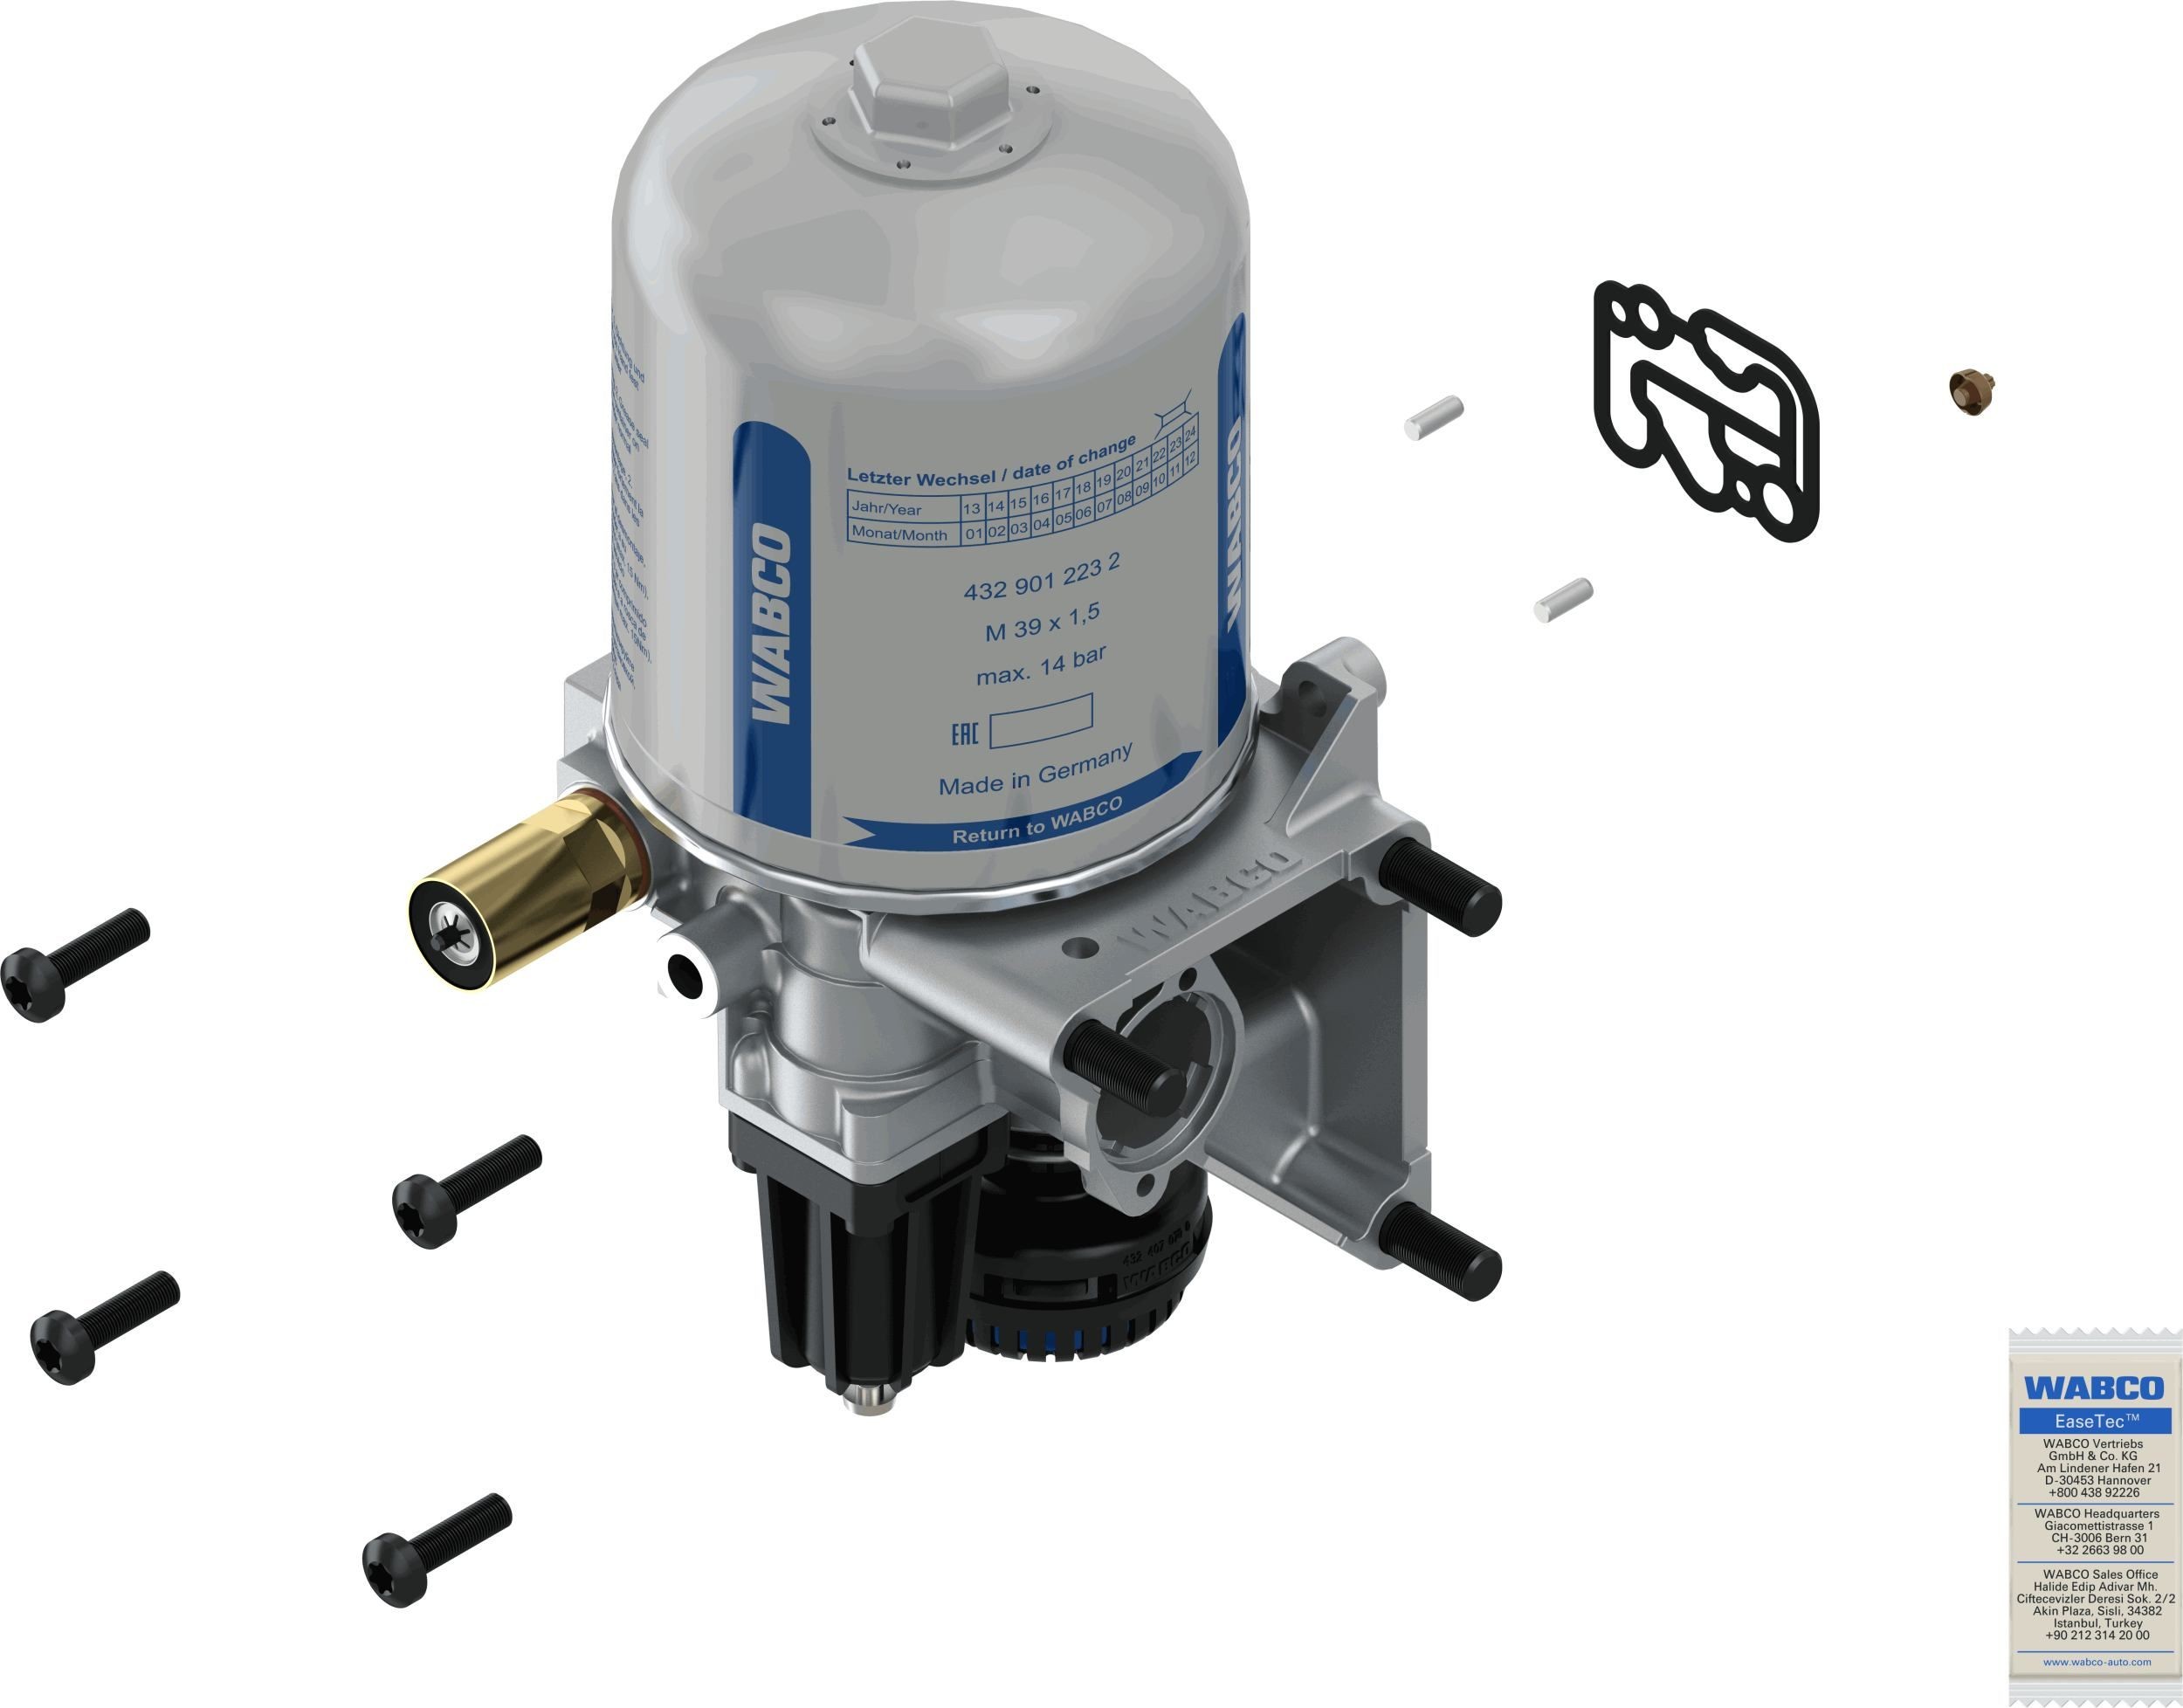 WABCO 9325109562 Air Dryer, compressed-air system